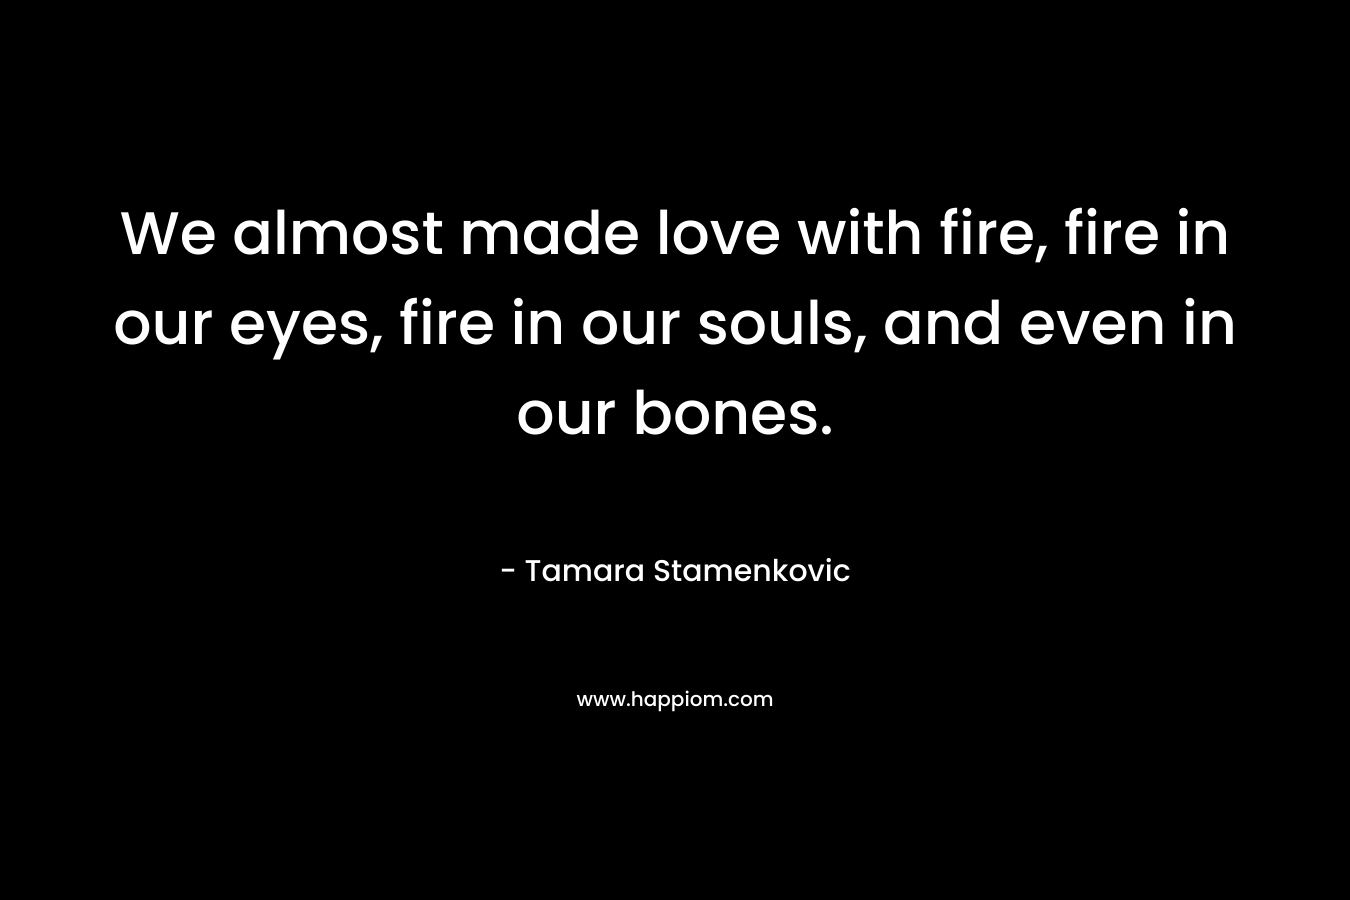 We almost made love with fire, fire in our eyes, fire in our souls, and even in our bones. – Tamara Stamenkovic